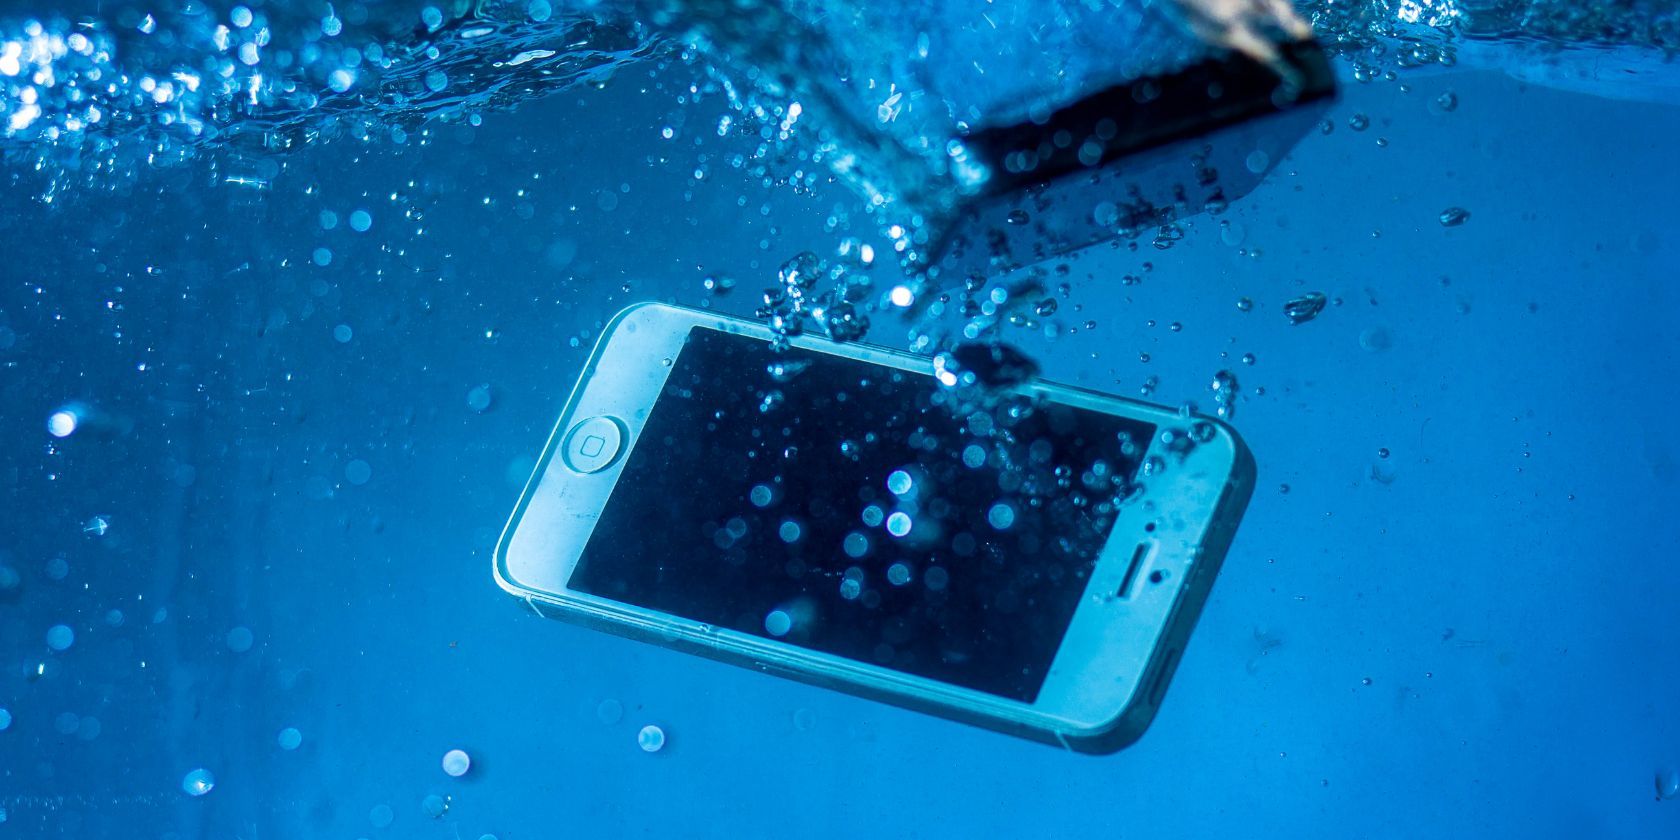 iPhone-submerged-in-water